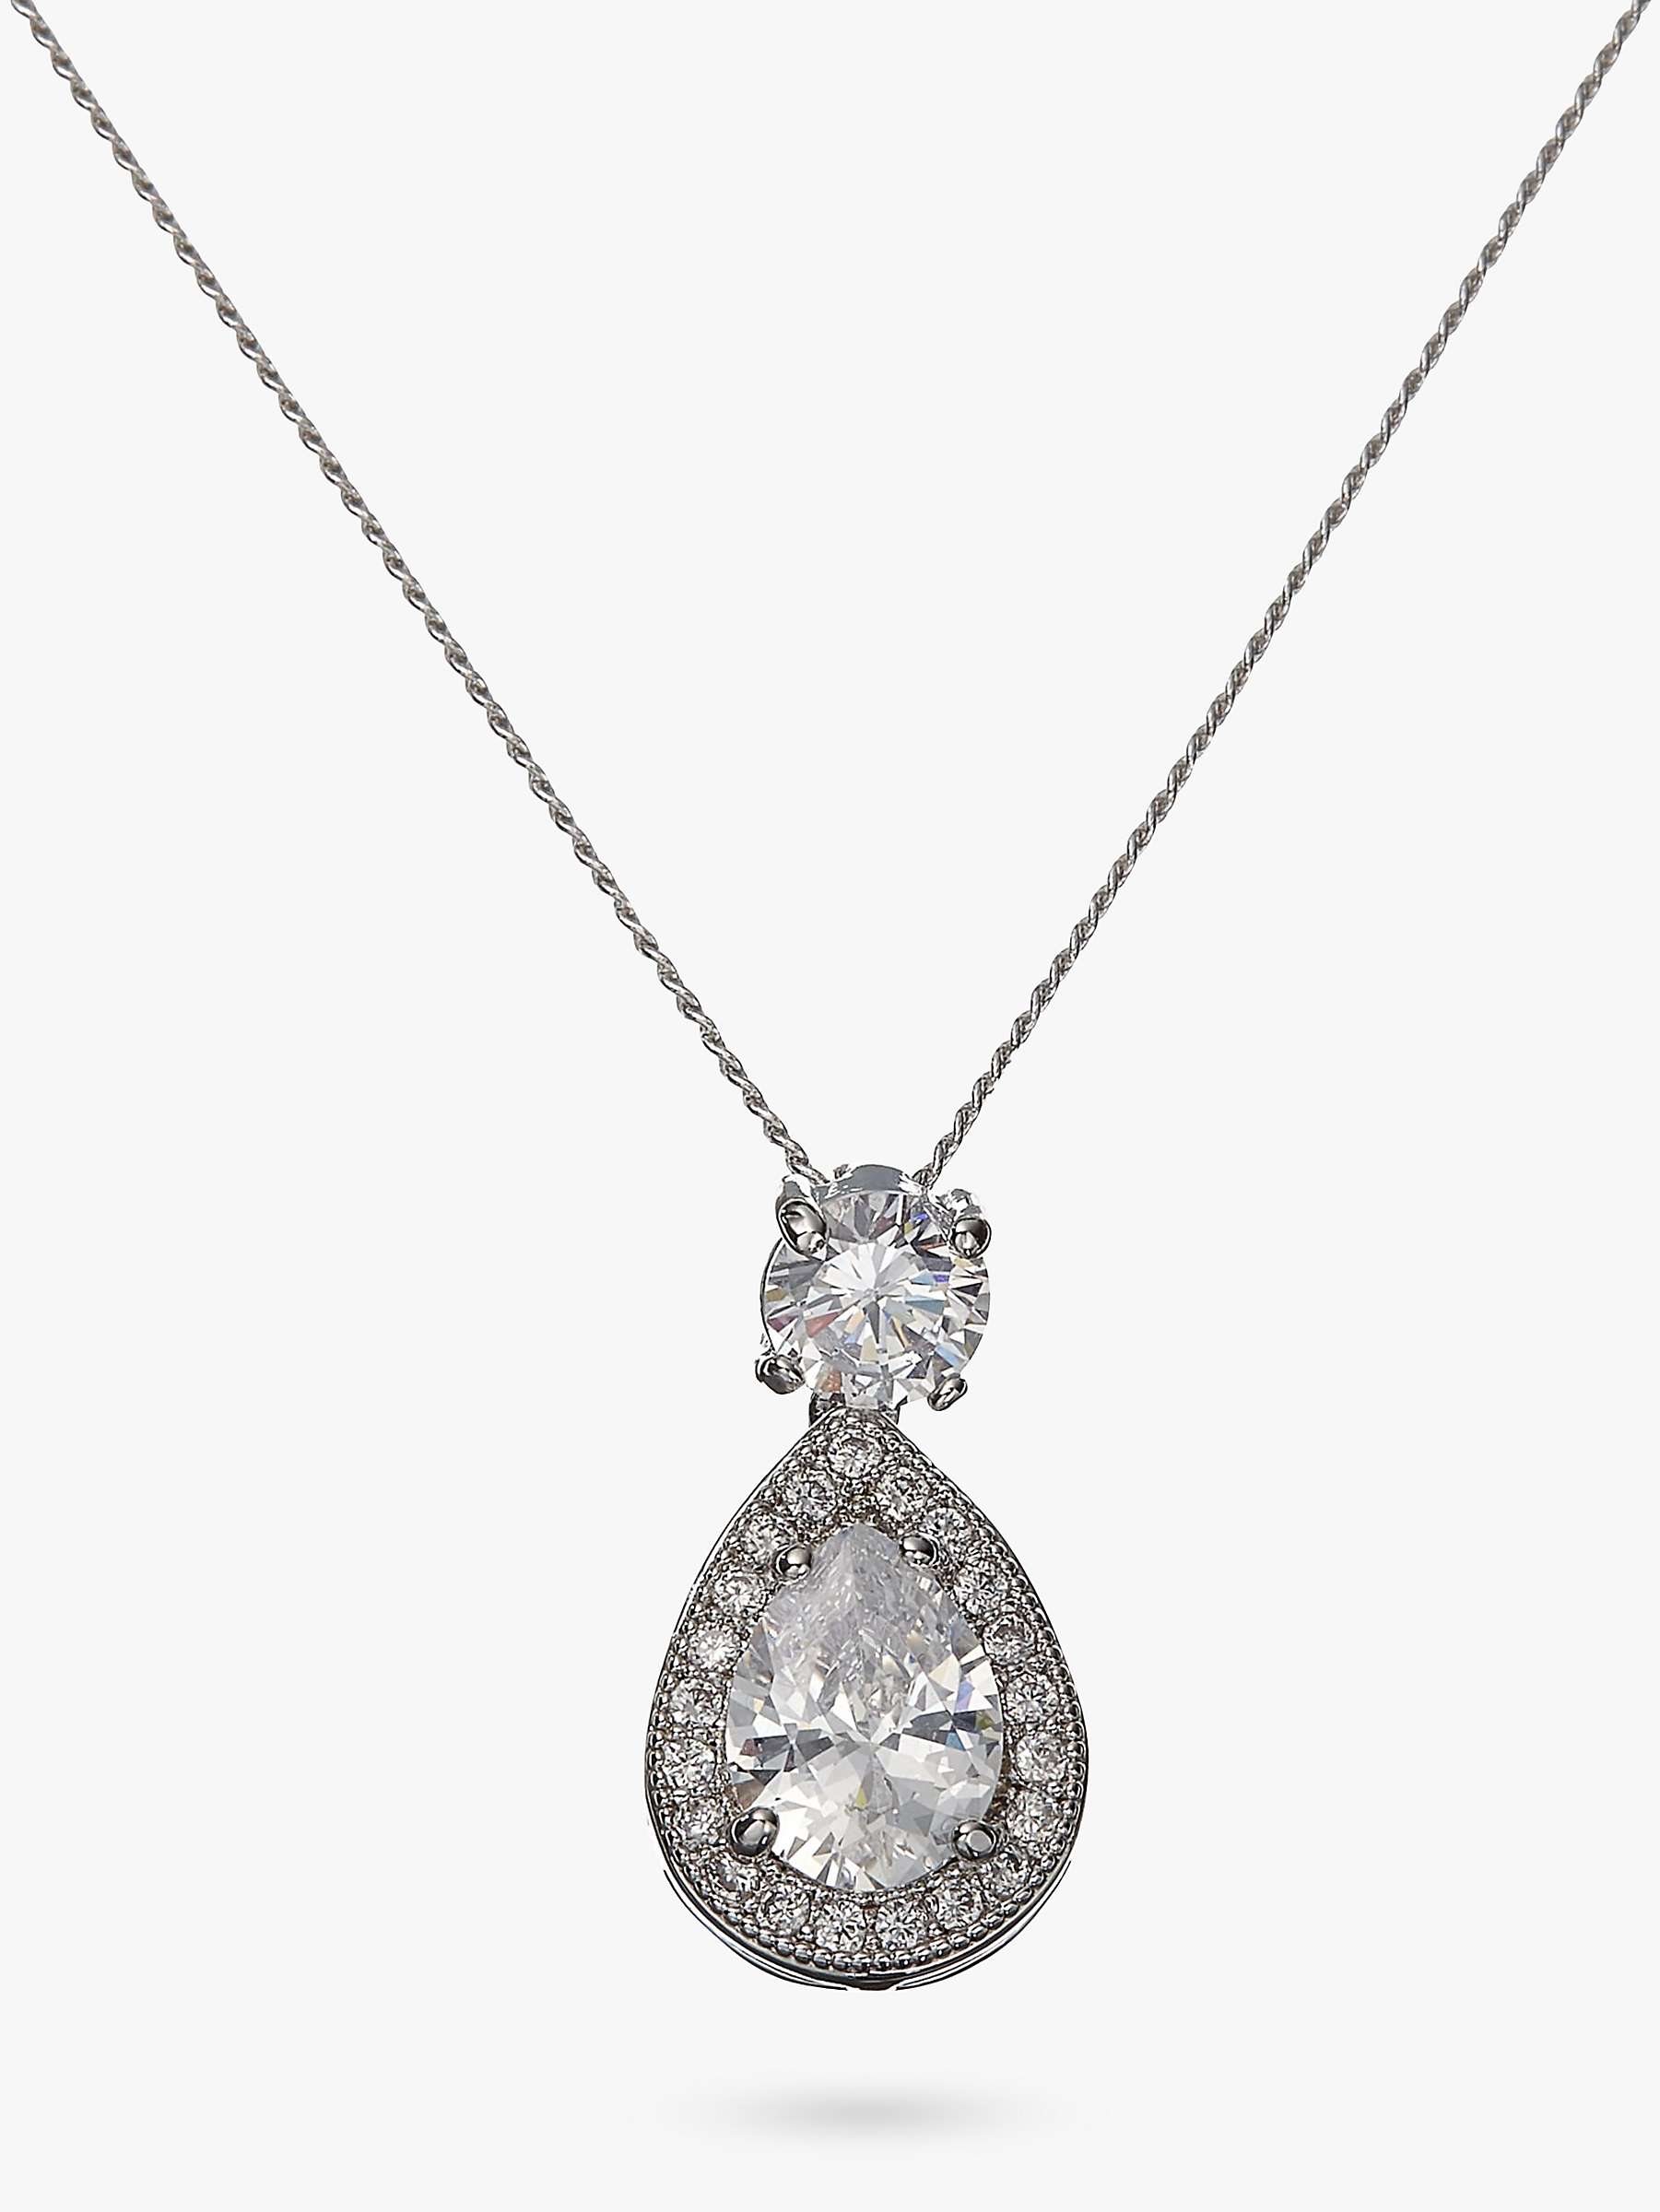 Buy Ivory & Co. Limelight Teardrop Cubic Zirconia Pave Pendant Necklace, Silver Online at johnlewis.com